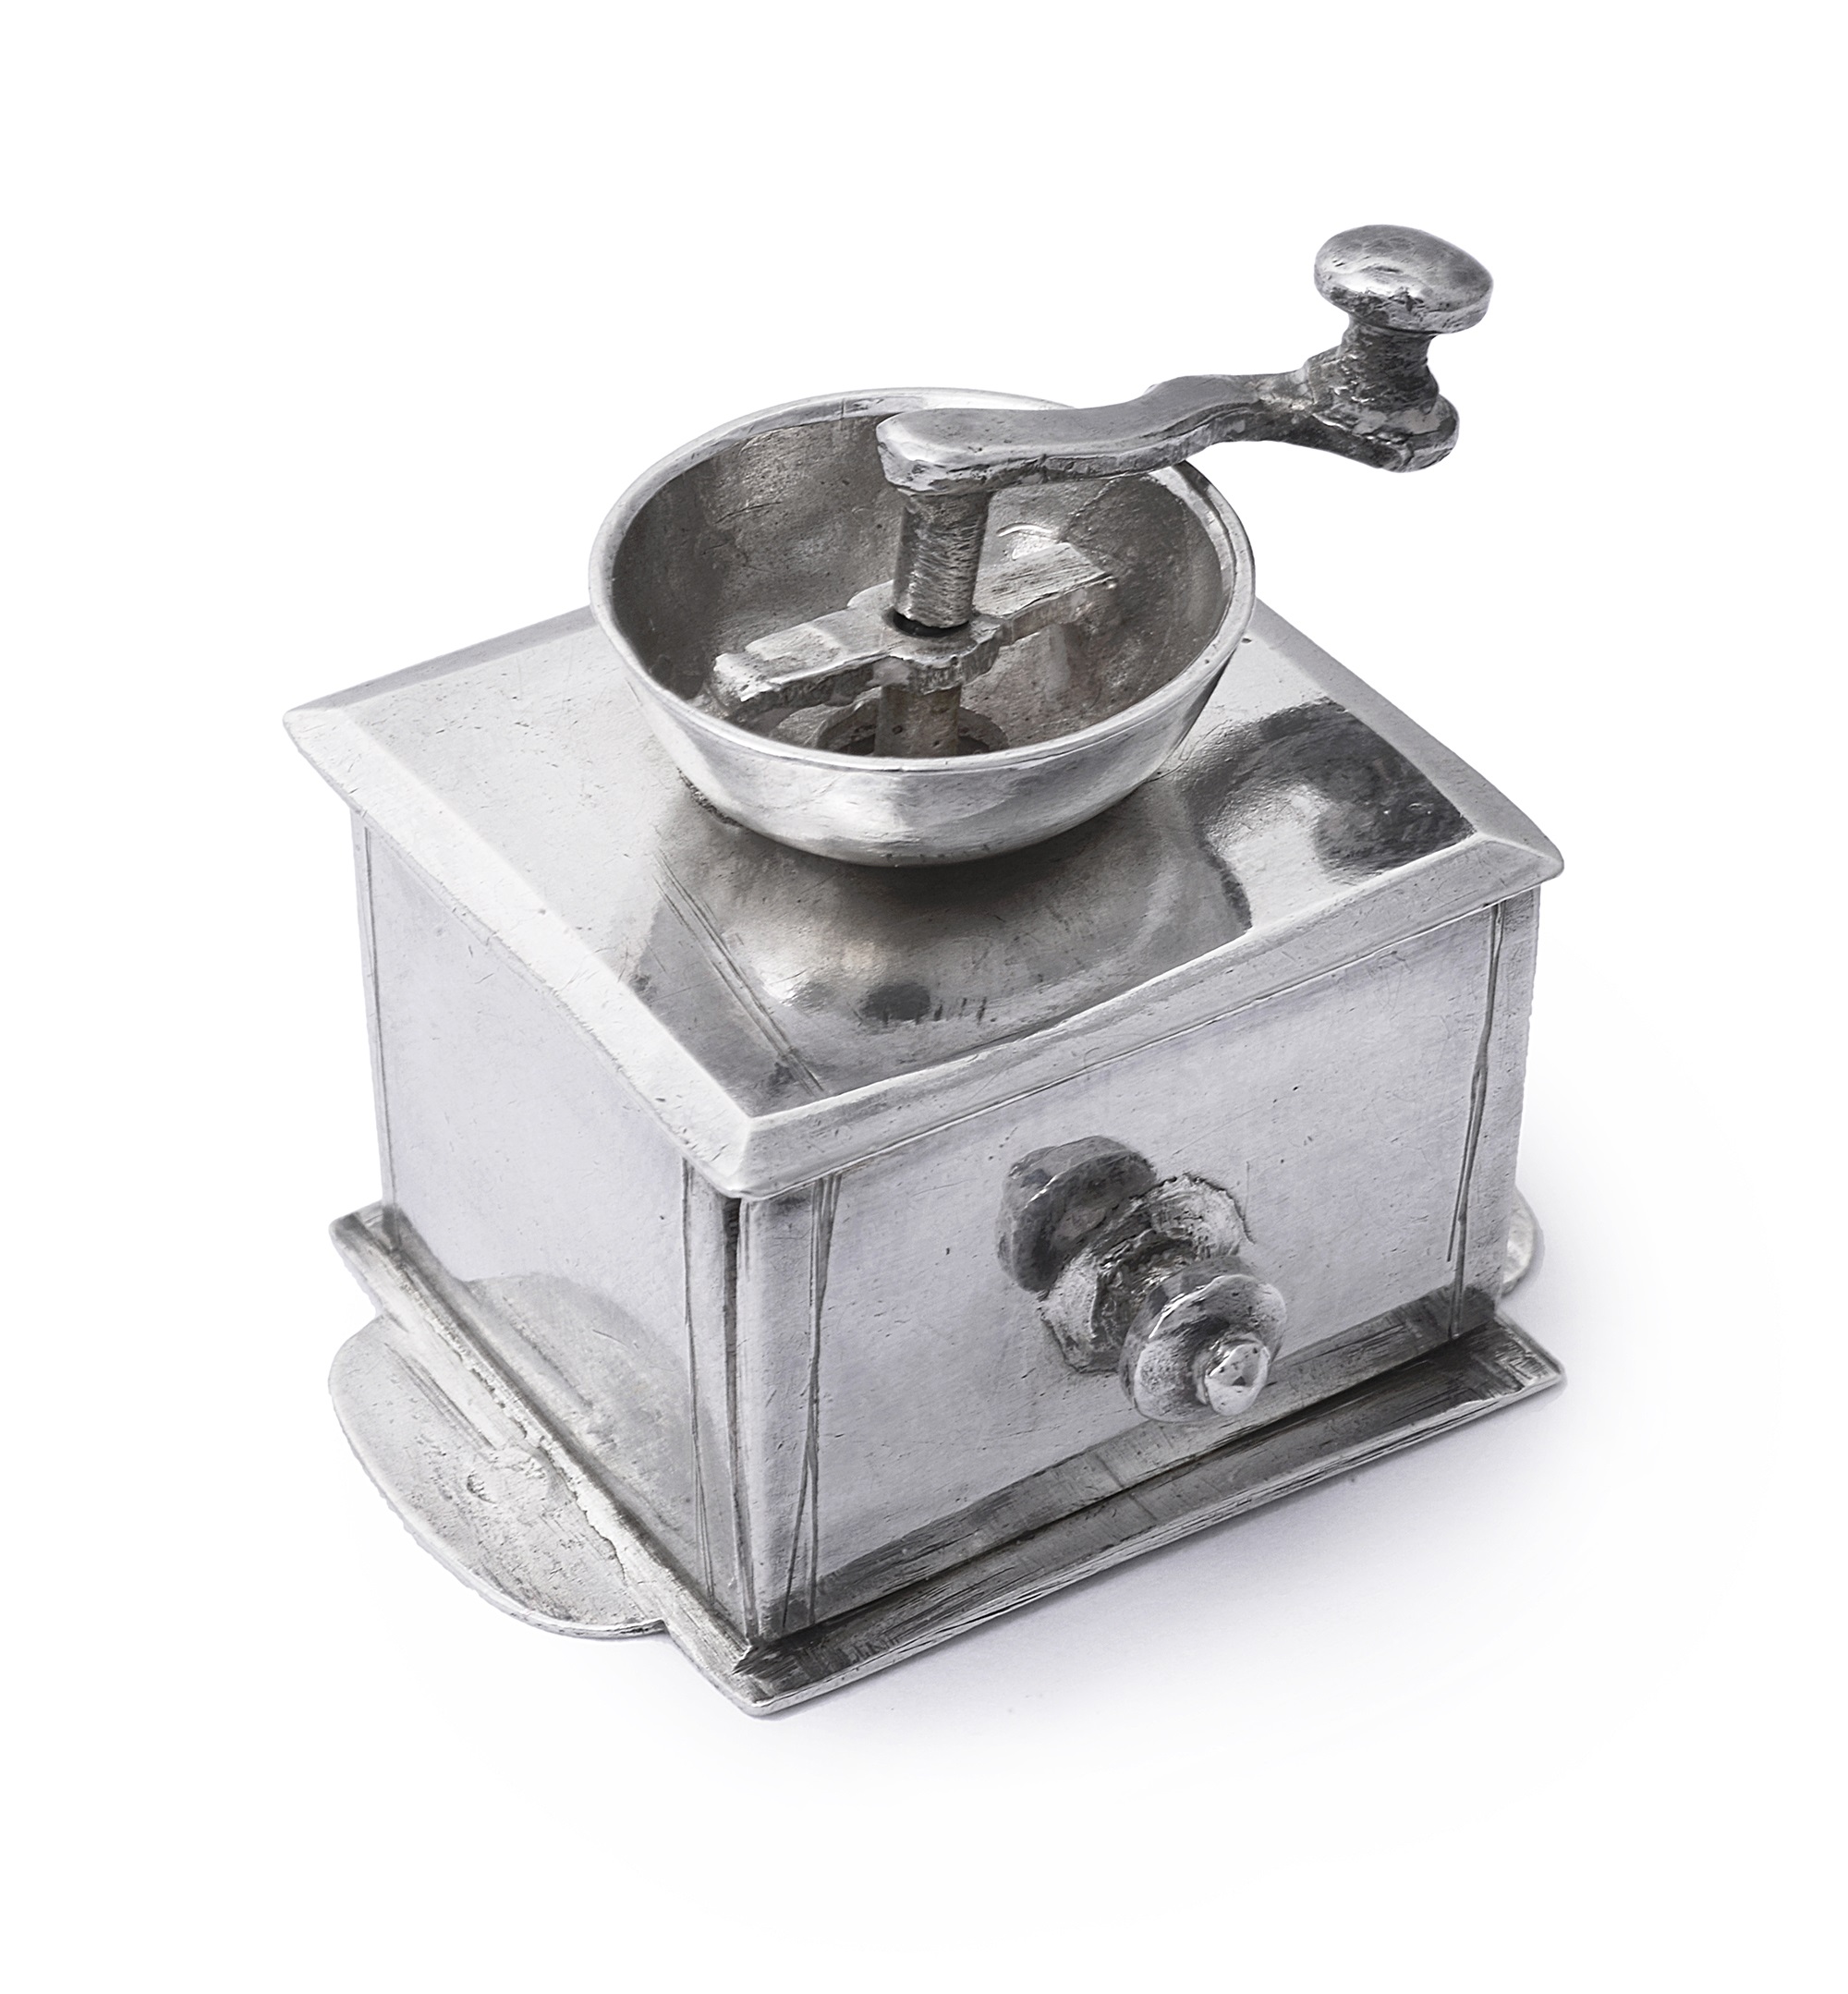 A DUTCH SILVER MINIATURE COFFEE GRINDER, MAKER'S MARK IB IN MONOGRAM, POSSIBLY FOR JAN BORDUUR,